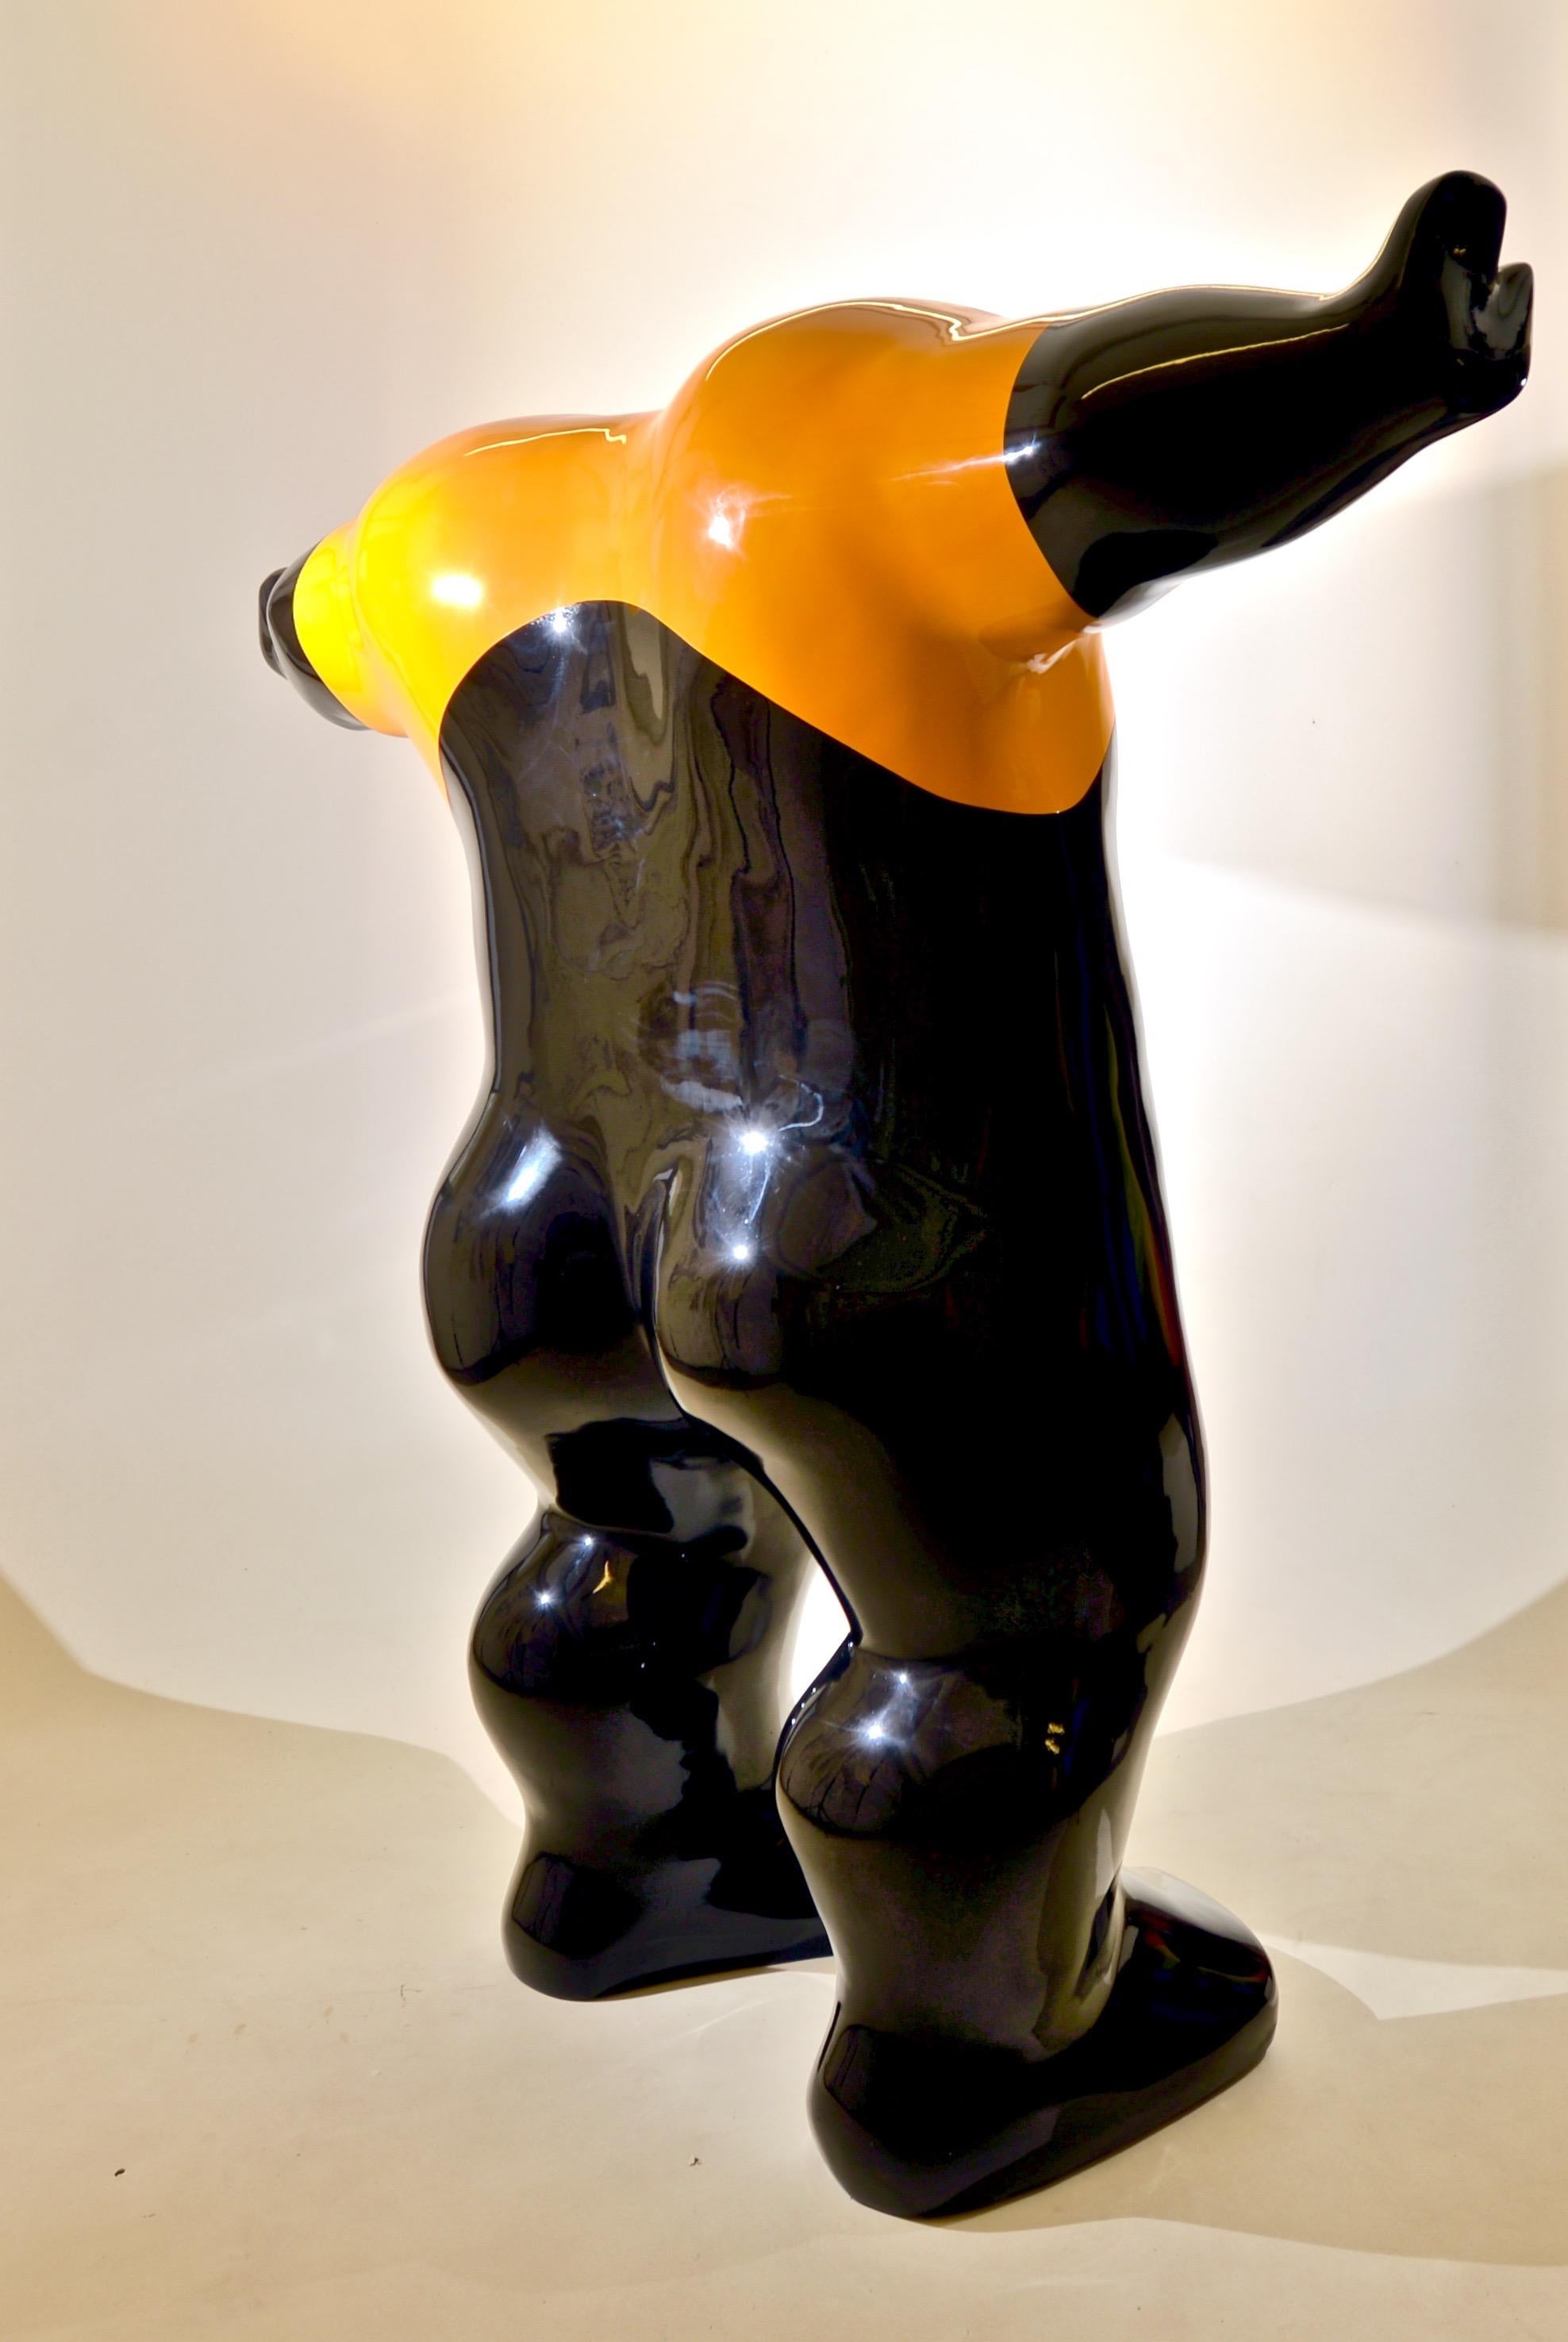 DEFENDER - a powerful and one-off sculpture by British artist Sam Shendi For Sale 4